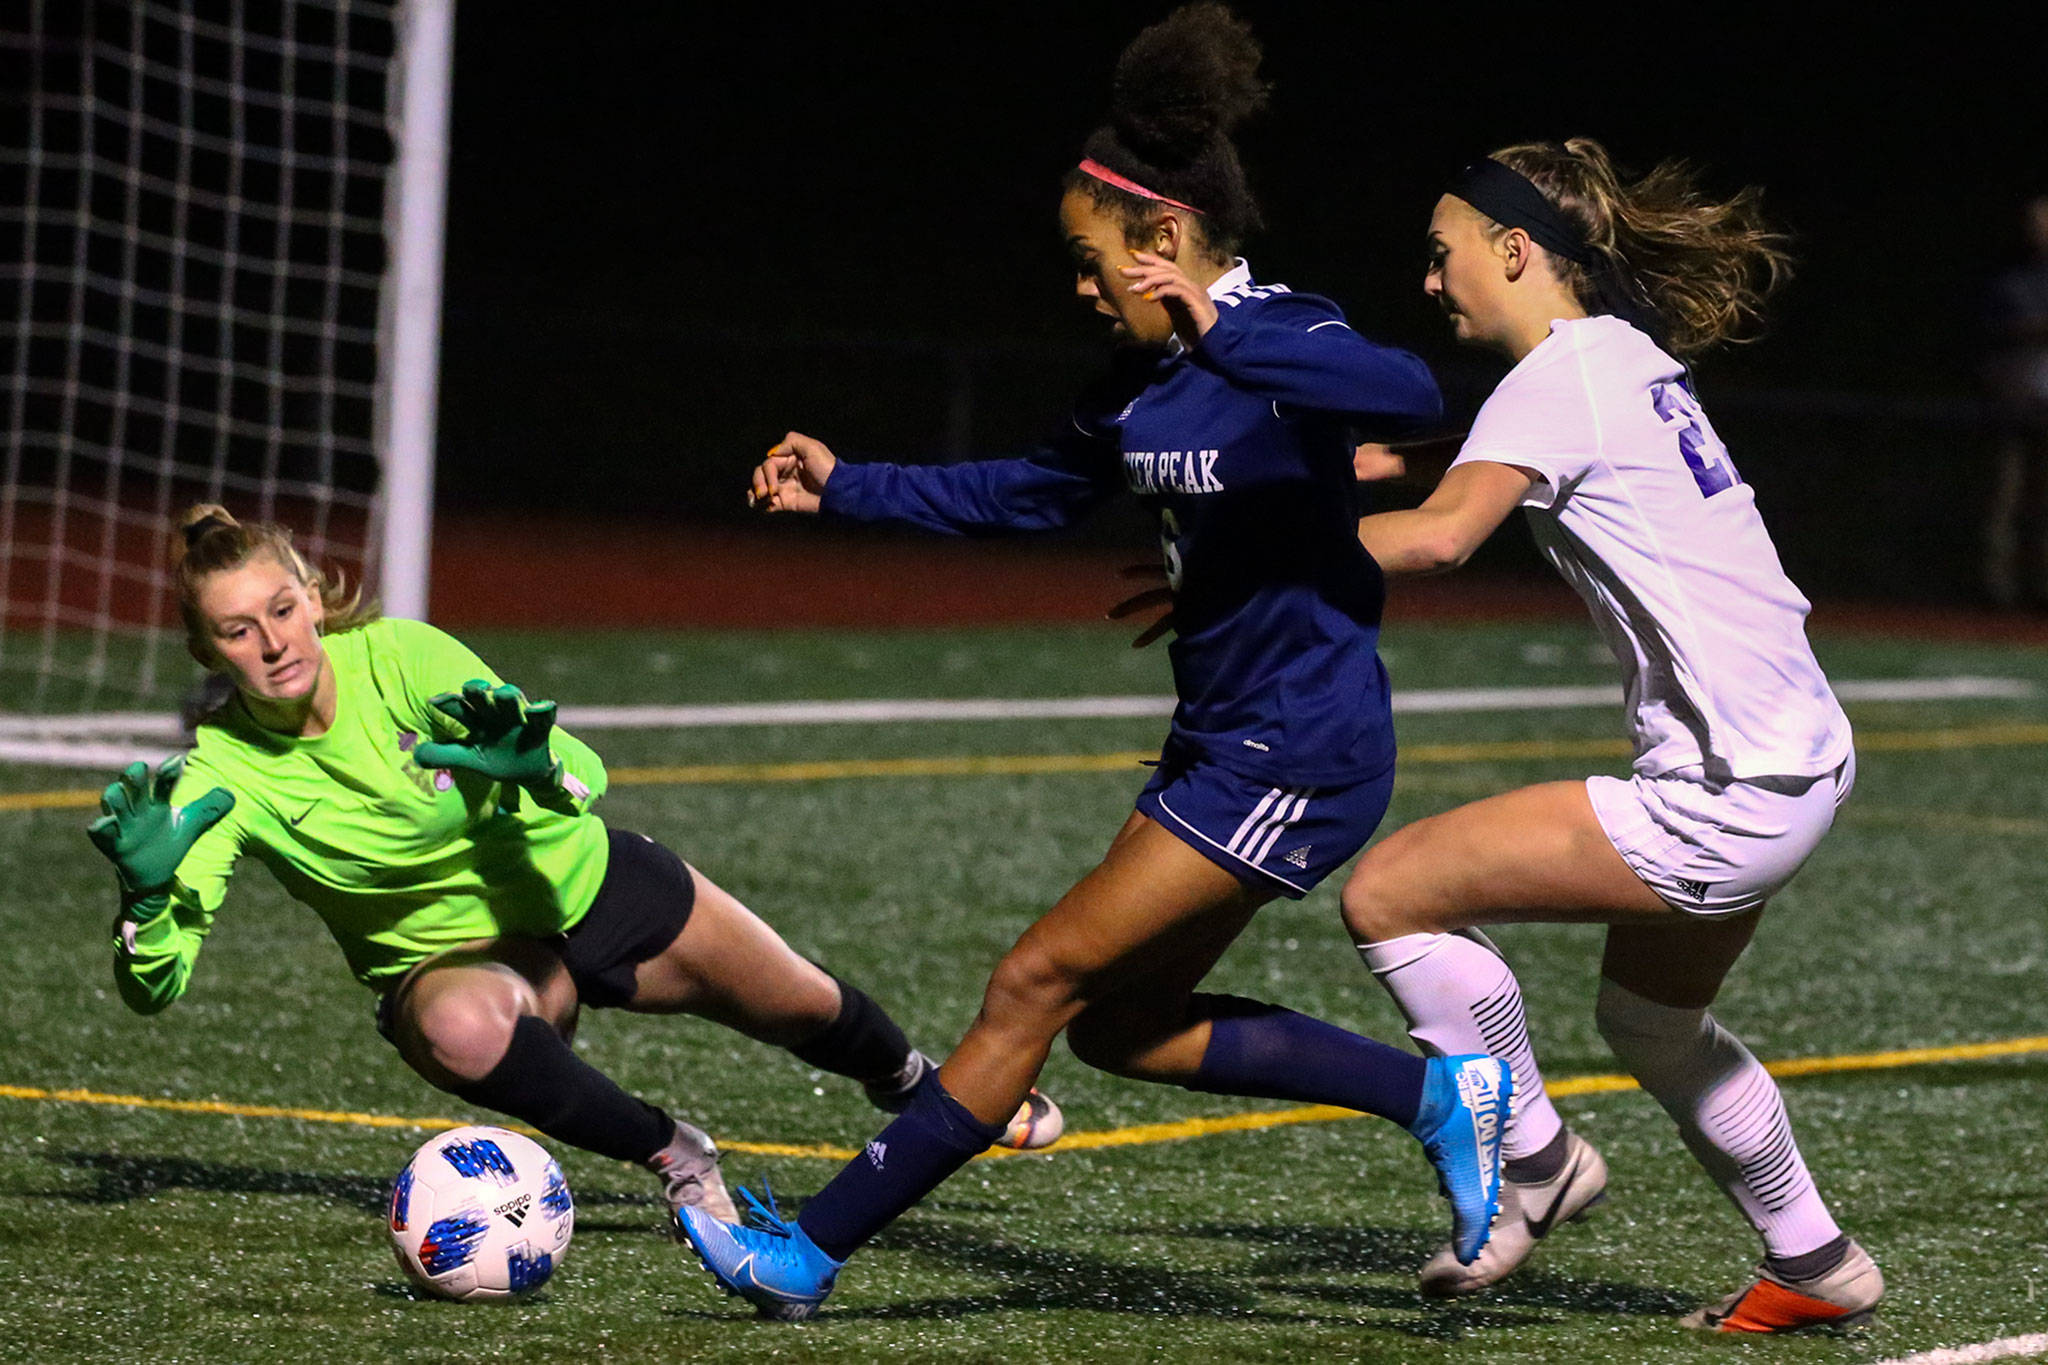 Sumner goalkeeper McAllister Smith (left) stops a run at goal by Glacier Peak’s Aaliyah Collins (middle) during a 4A state playoff game on Wednesday at Glacier Peak High School in Snohomish. Sumner won 2-1. (Kevin Clark / The Herald)